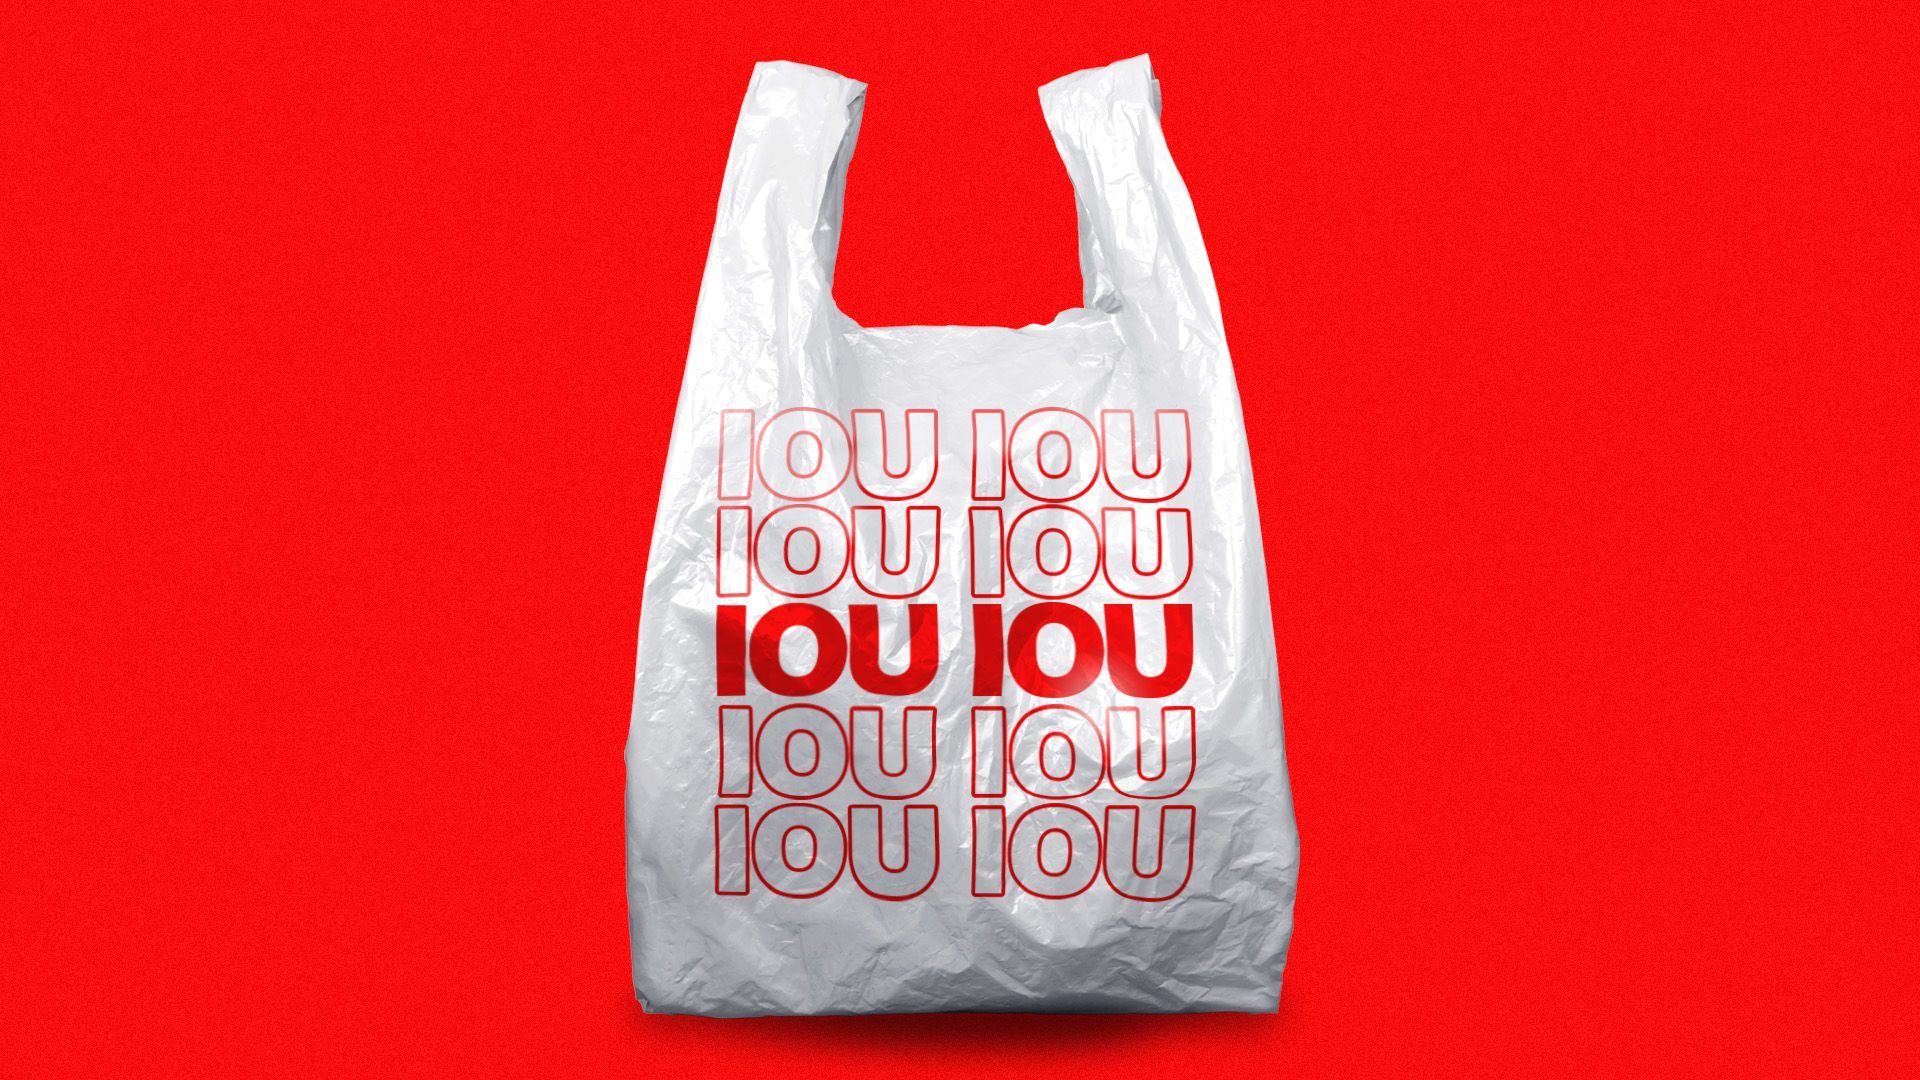 Illustration of a plastic "thank you bag" that instead reads "IOU" repeated